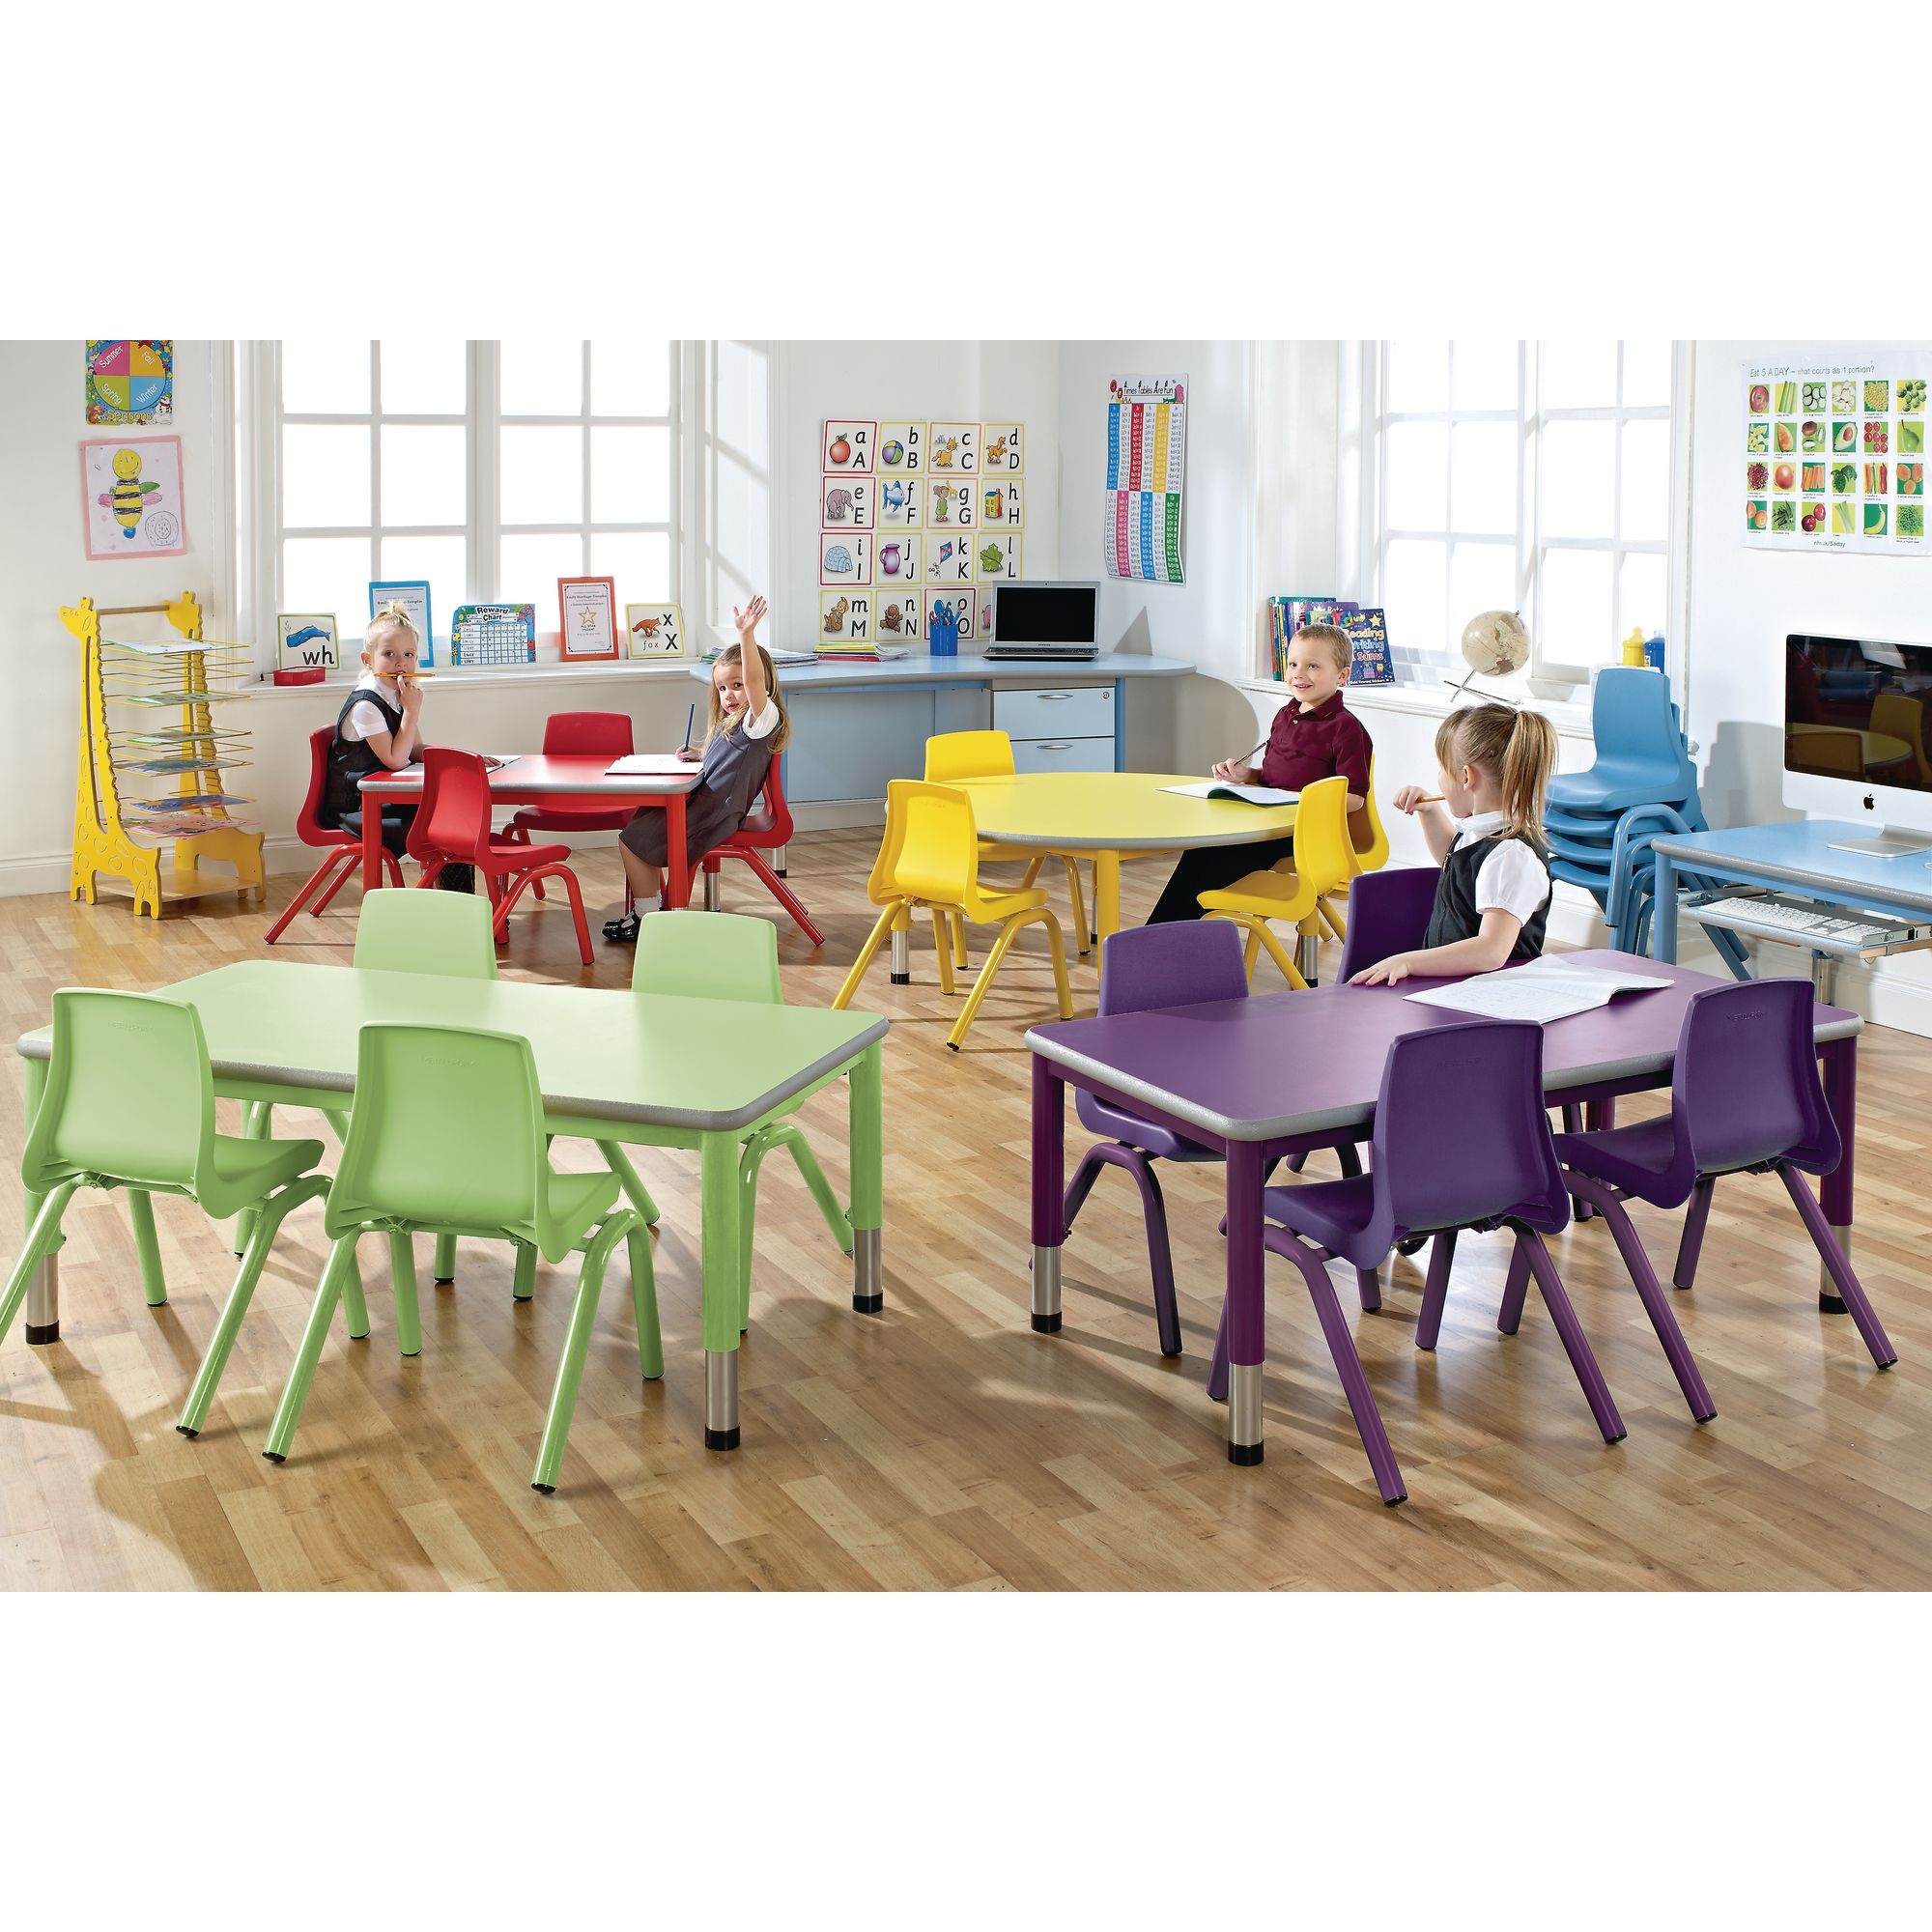 Harlequin Rectangular Height Adjustable Steel Classroom Pack: Table and 4 Chairs - 900 x 600 x 590mm - Yellow